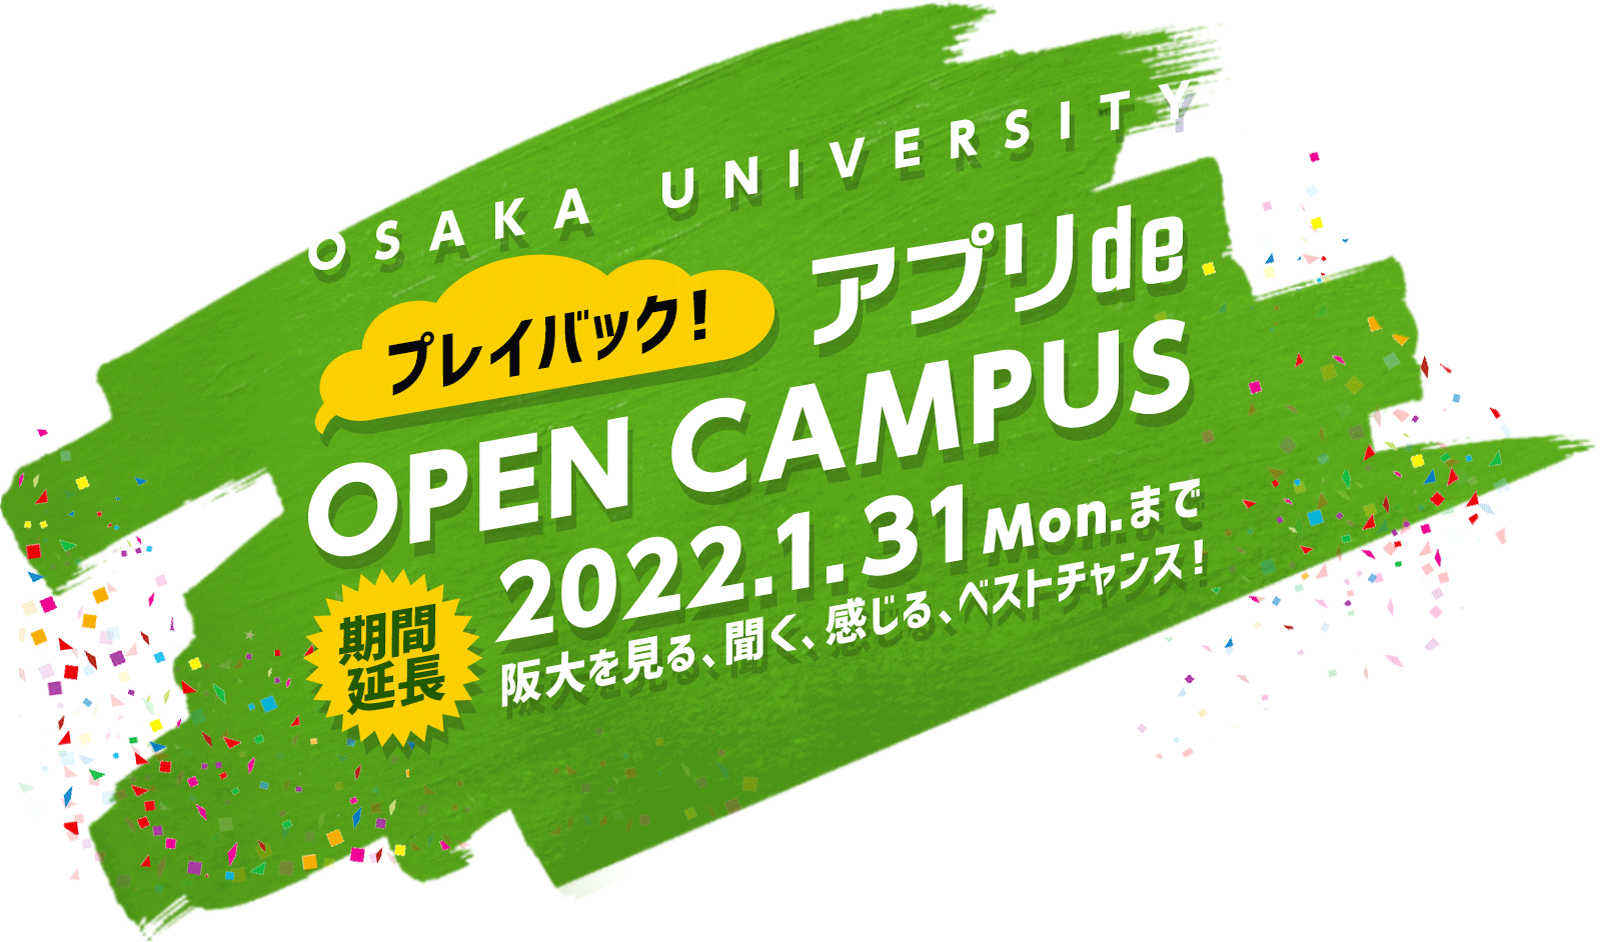 The In-App Open Campus is now available until Monday, January 31, 2022!